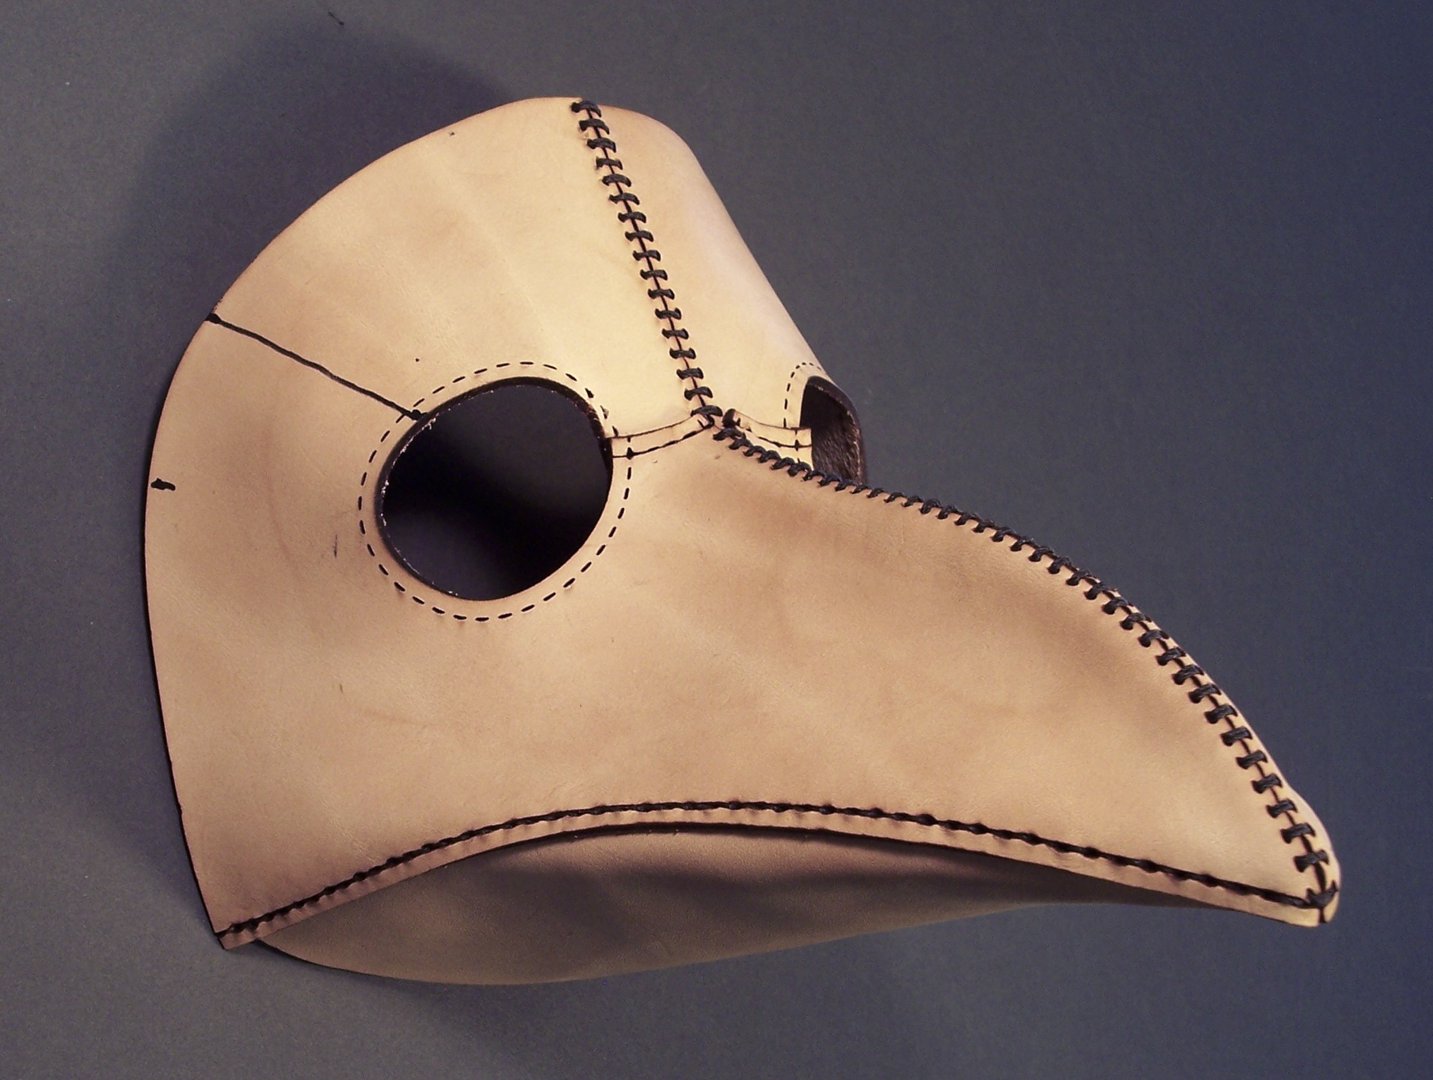 How To Make A Plague Doctor Mask Cardboard